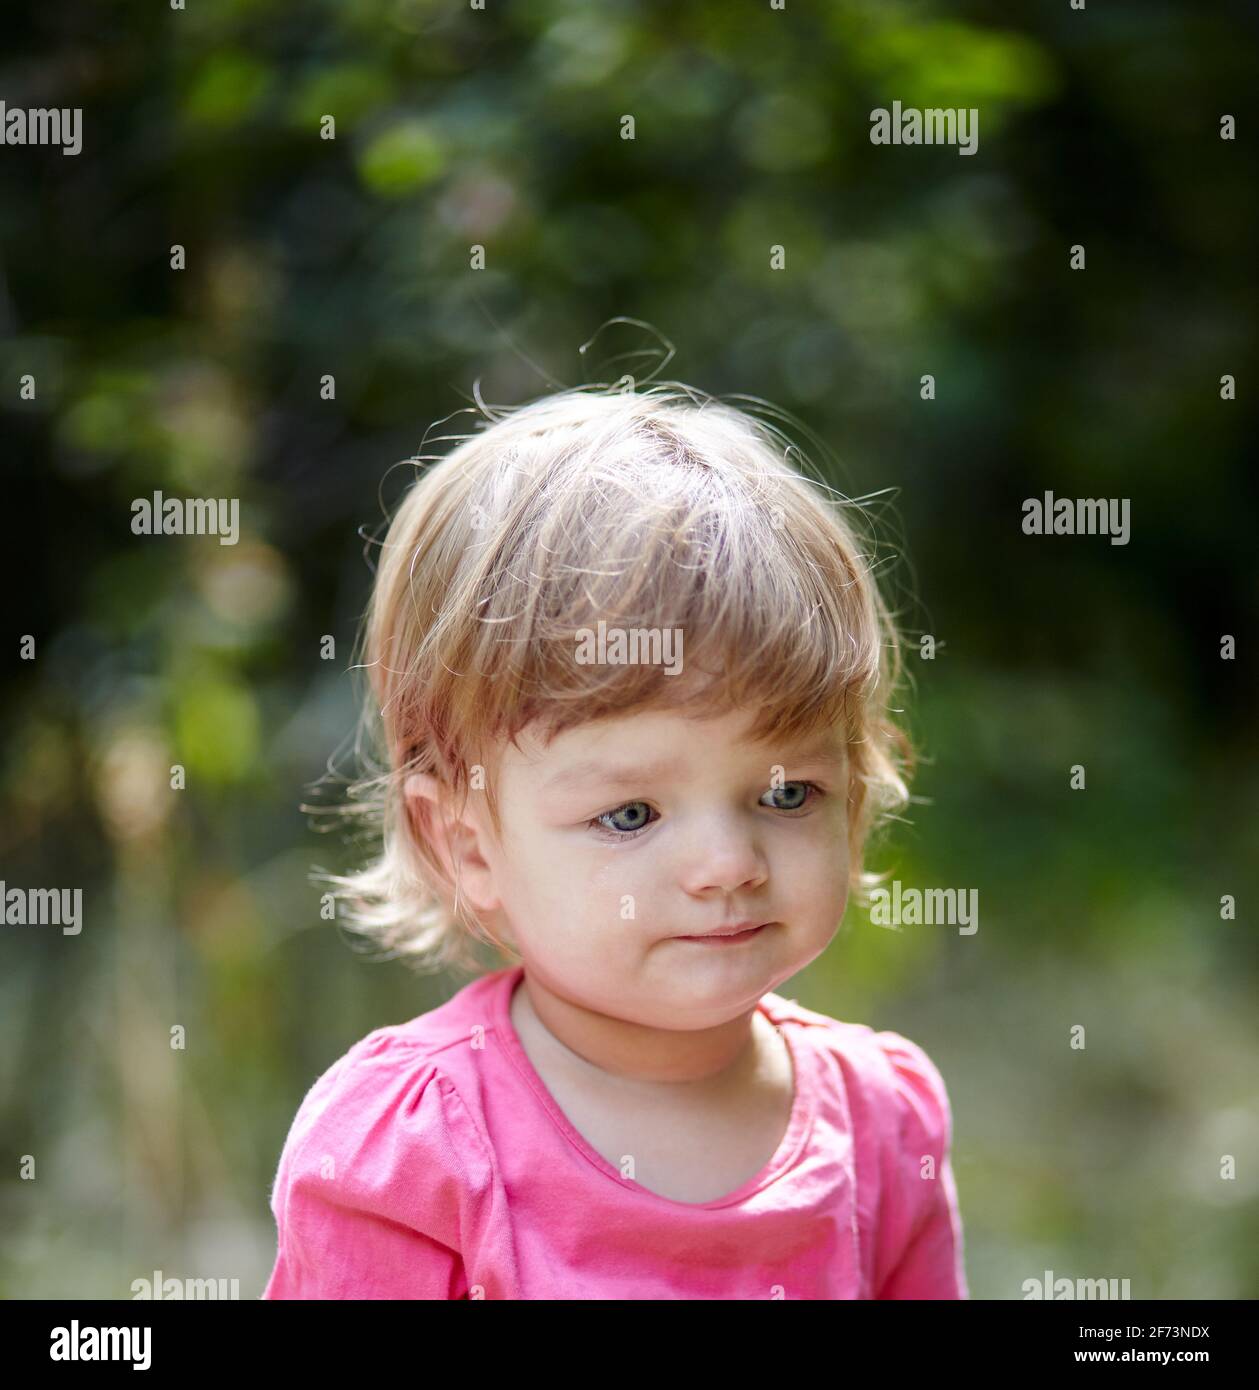 Sad child. Lonely little baby girl outdoors Stock Photo